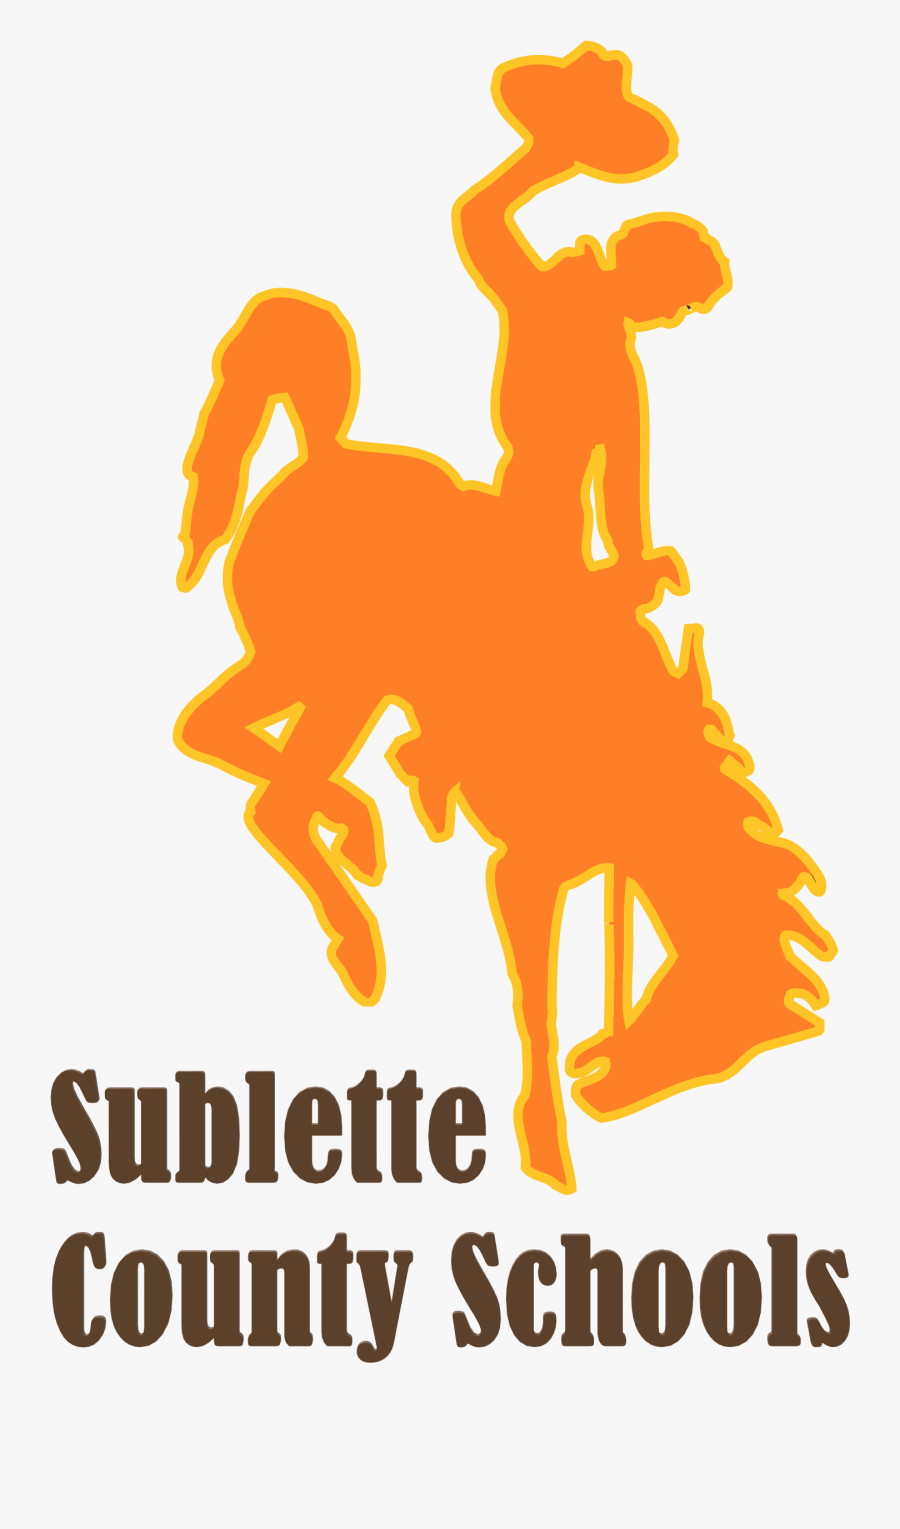 811 Visitpinedale Usfs Logo Scs2 - University Of Wyoming, Transparent Clipart